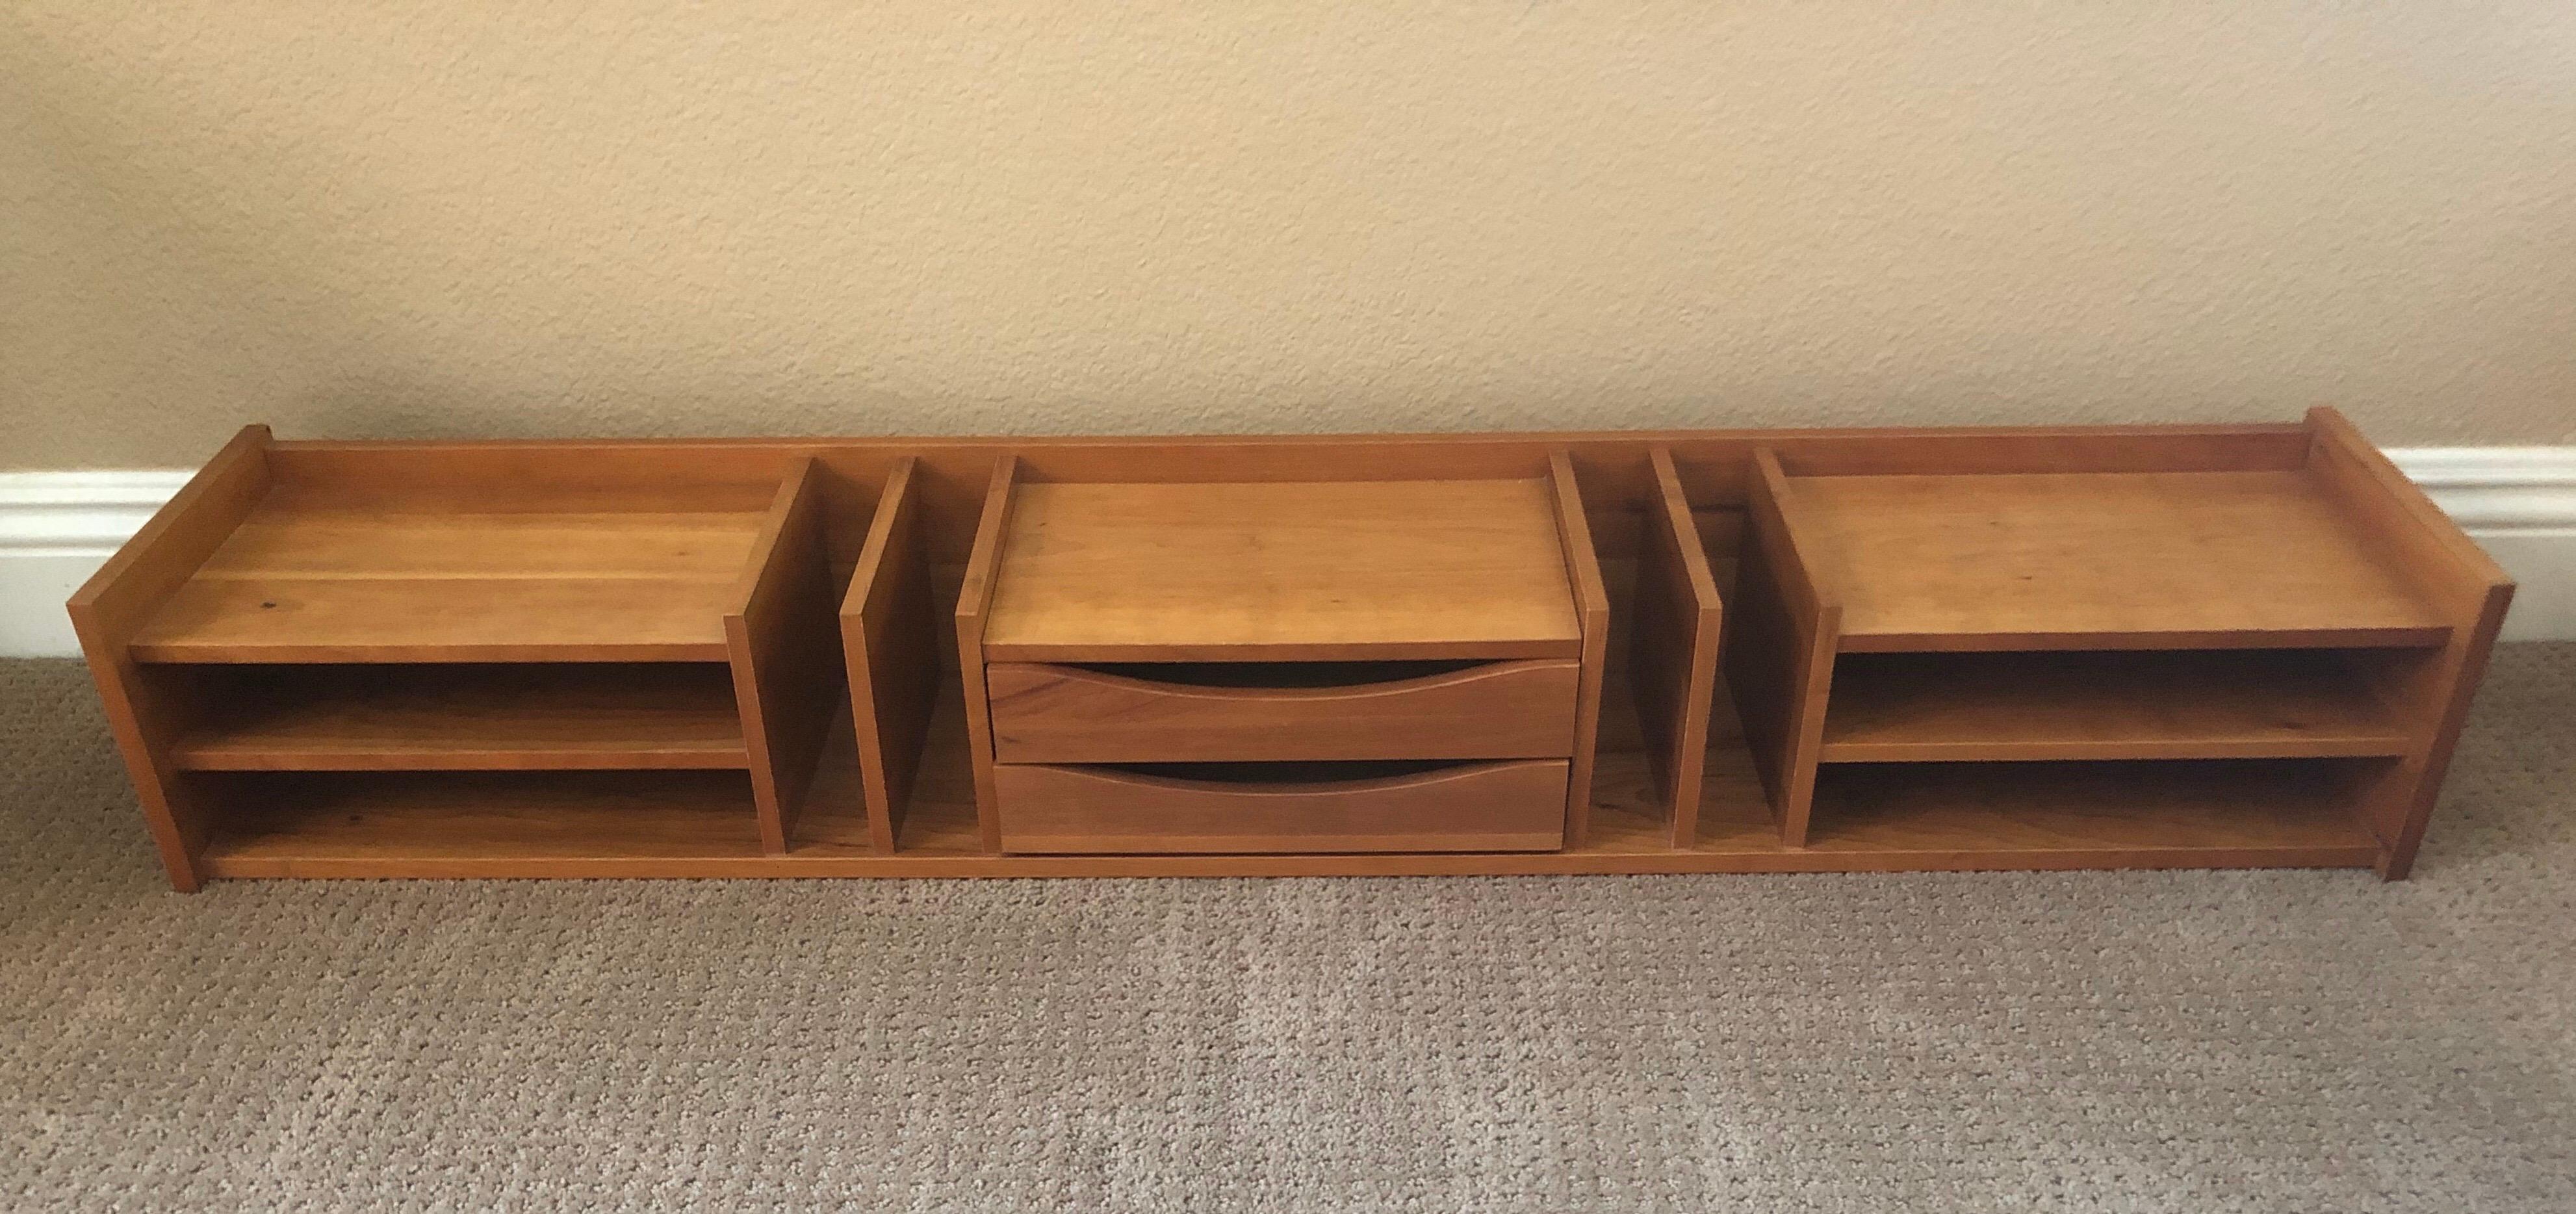 Very functional extra large Danish modern teak desk organizer or letter tray by Pedersen & Hansen, circa 1970s. There are seven horizontal letter trays, four vertical slots and two drawers. The piece is in good condition and measures 47.5